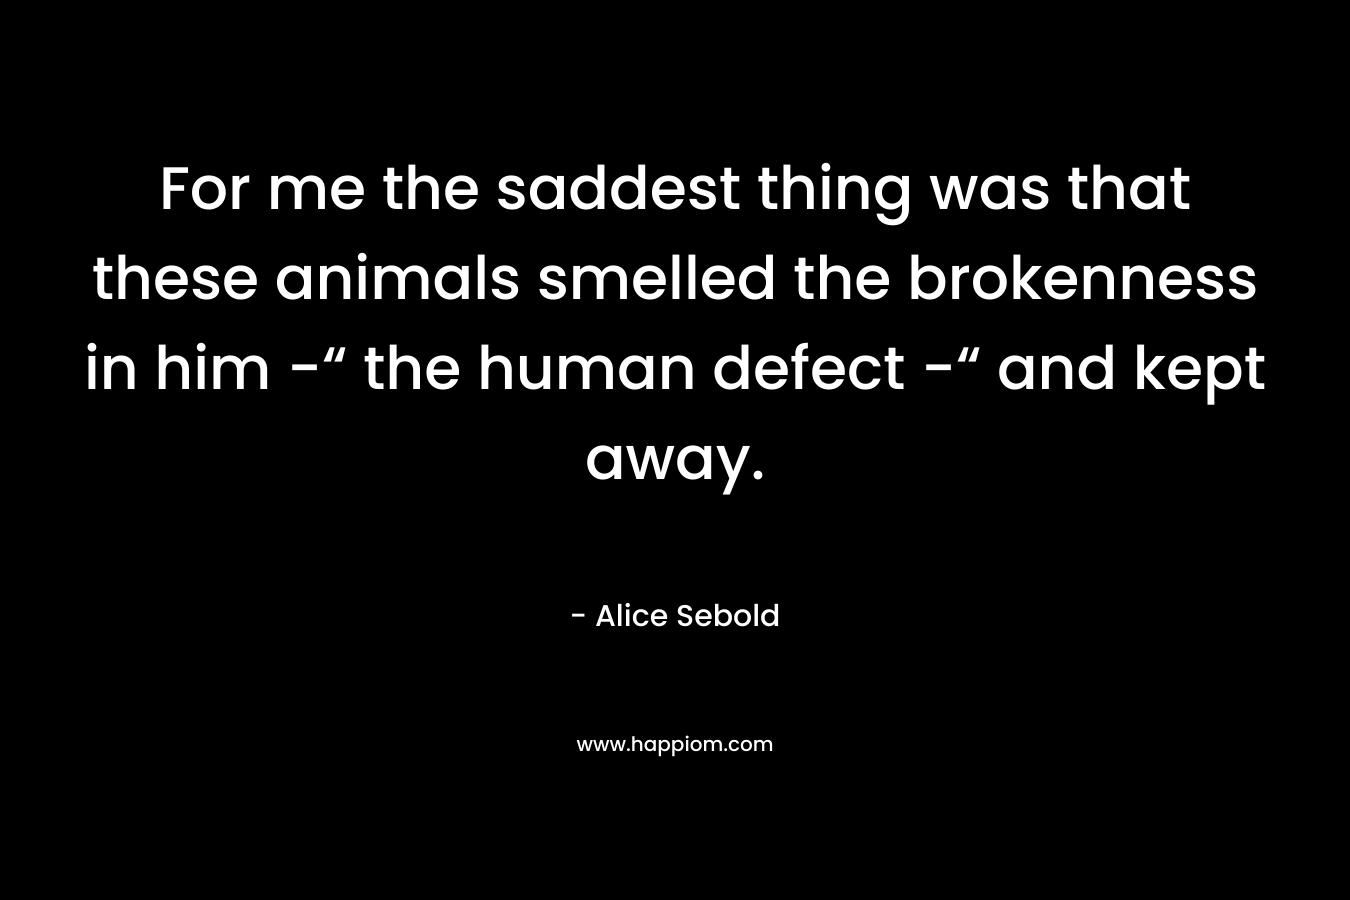 For me the saddest thing was that these animals smelled the brokenness in him -“ the human defect -“ and kept away. – Alice Sebold